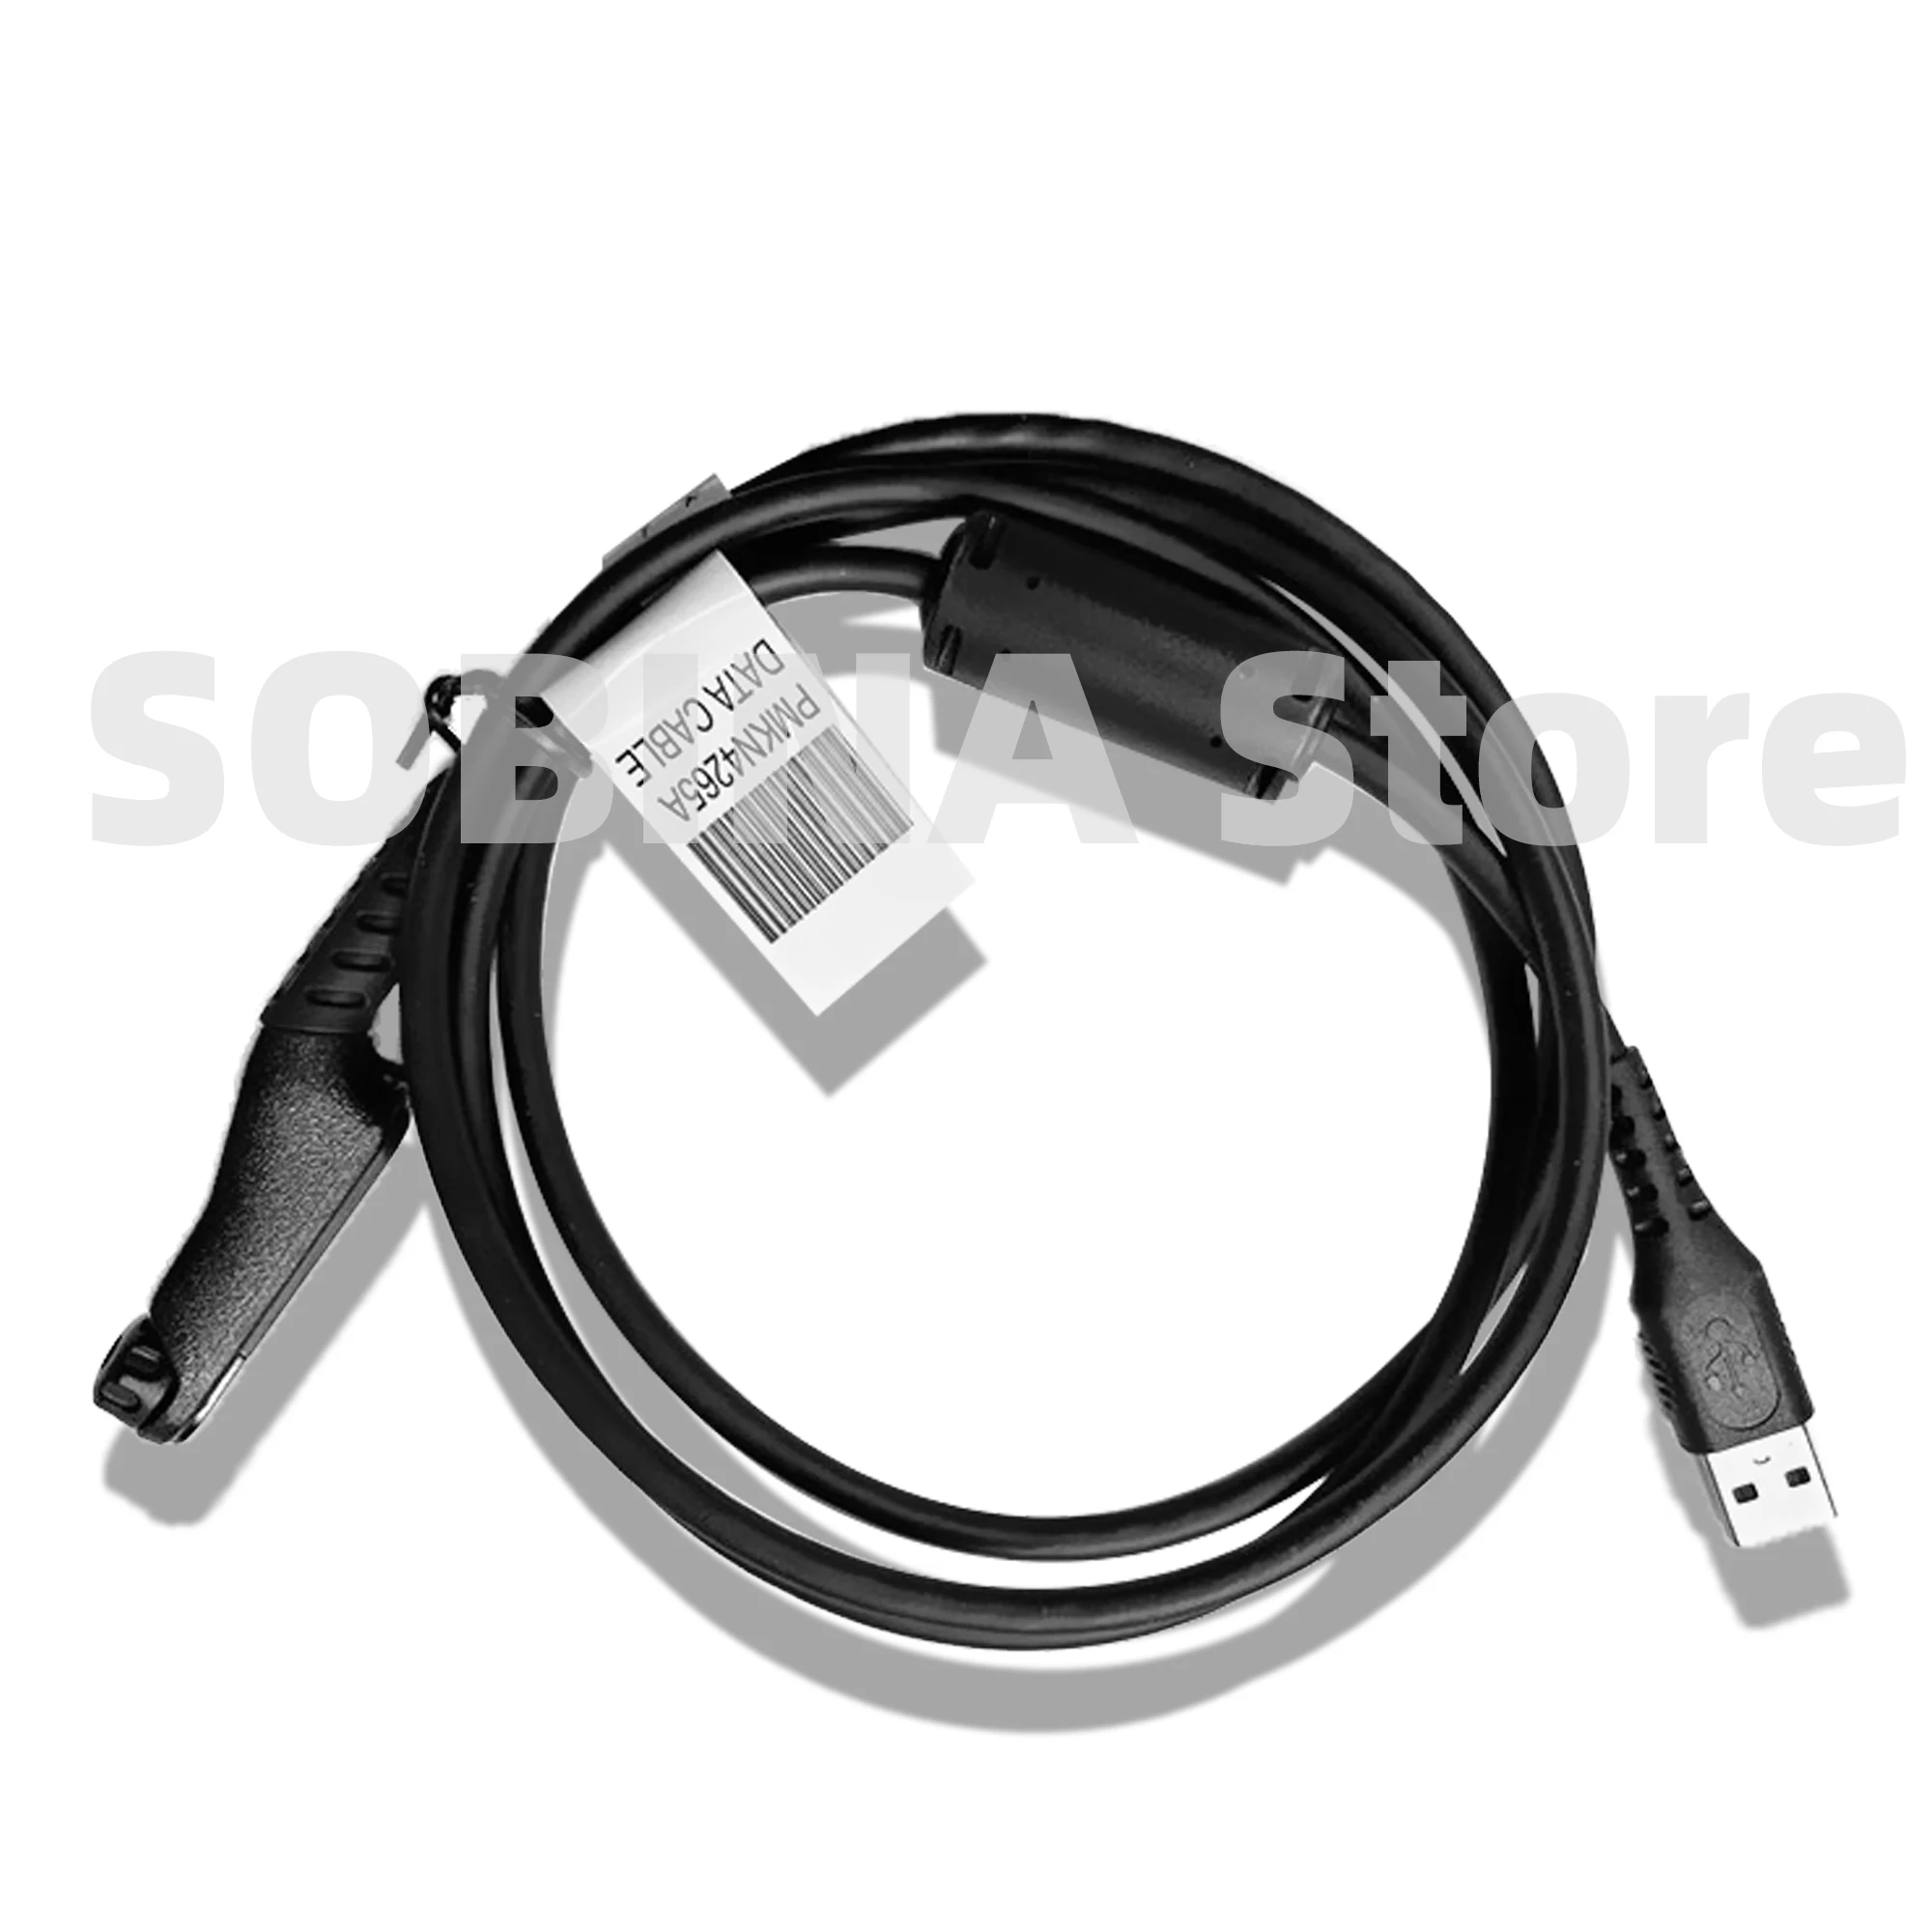 

PMKN4265A USB Programming Cable For Motorola Mototrbo R6 R7 R7a Two Way Radio Walkie Talkie Drop Shipping